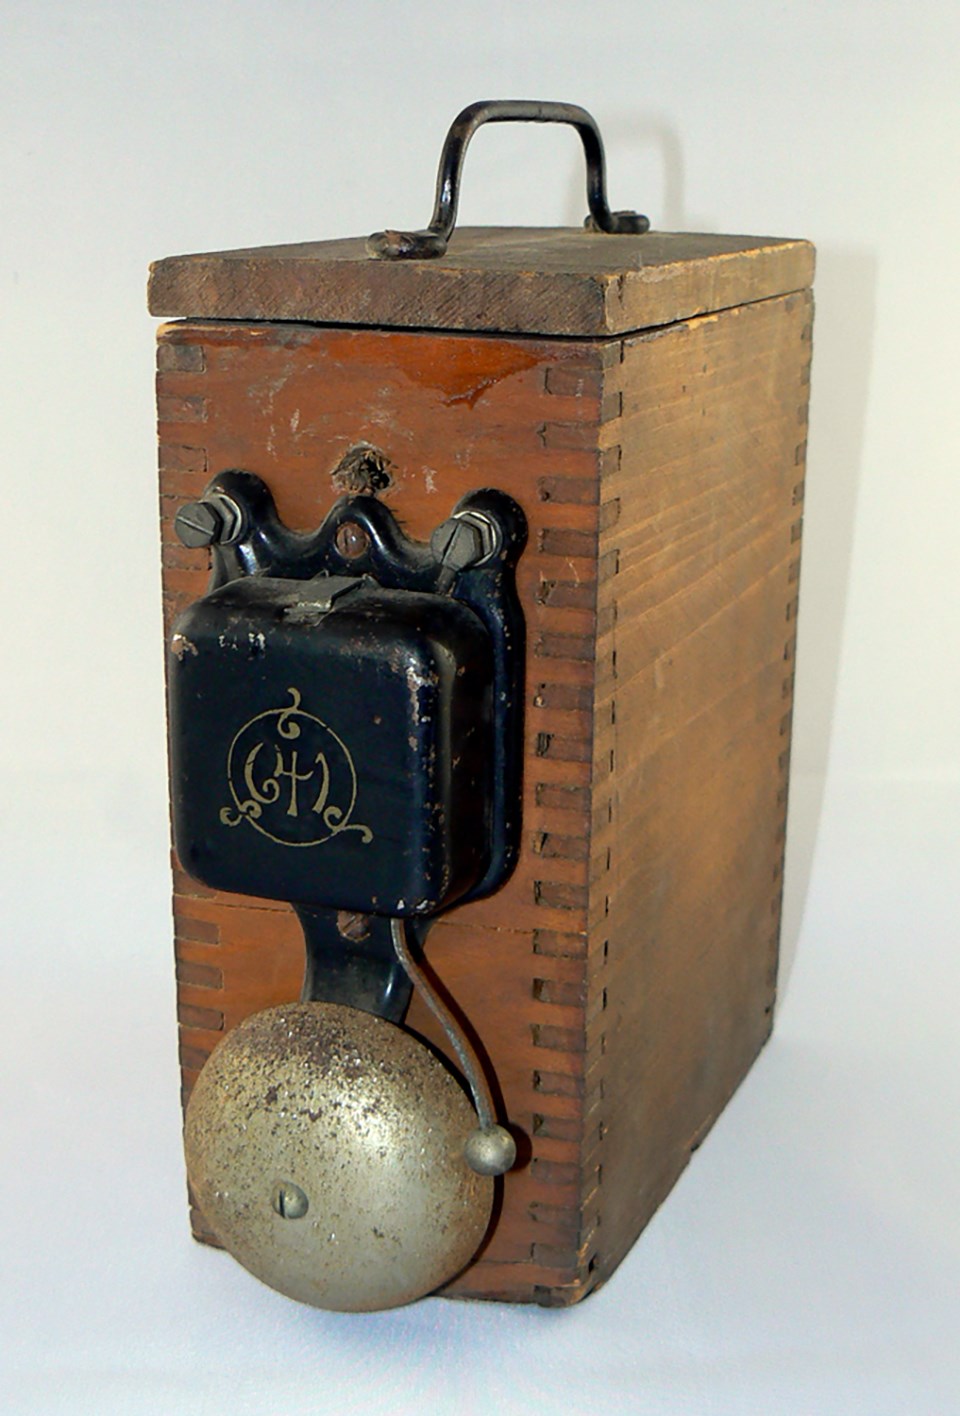 An early 20th century portable electric callbell.